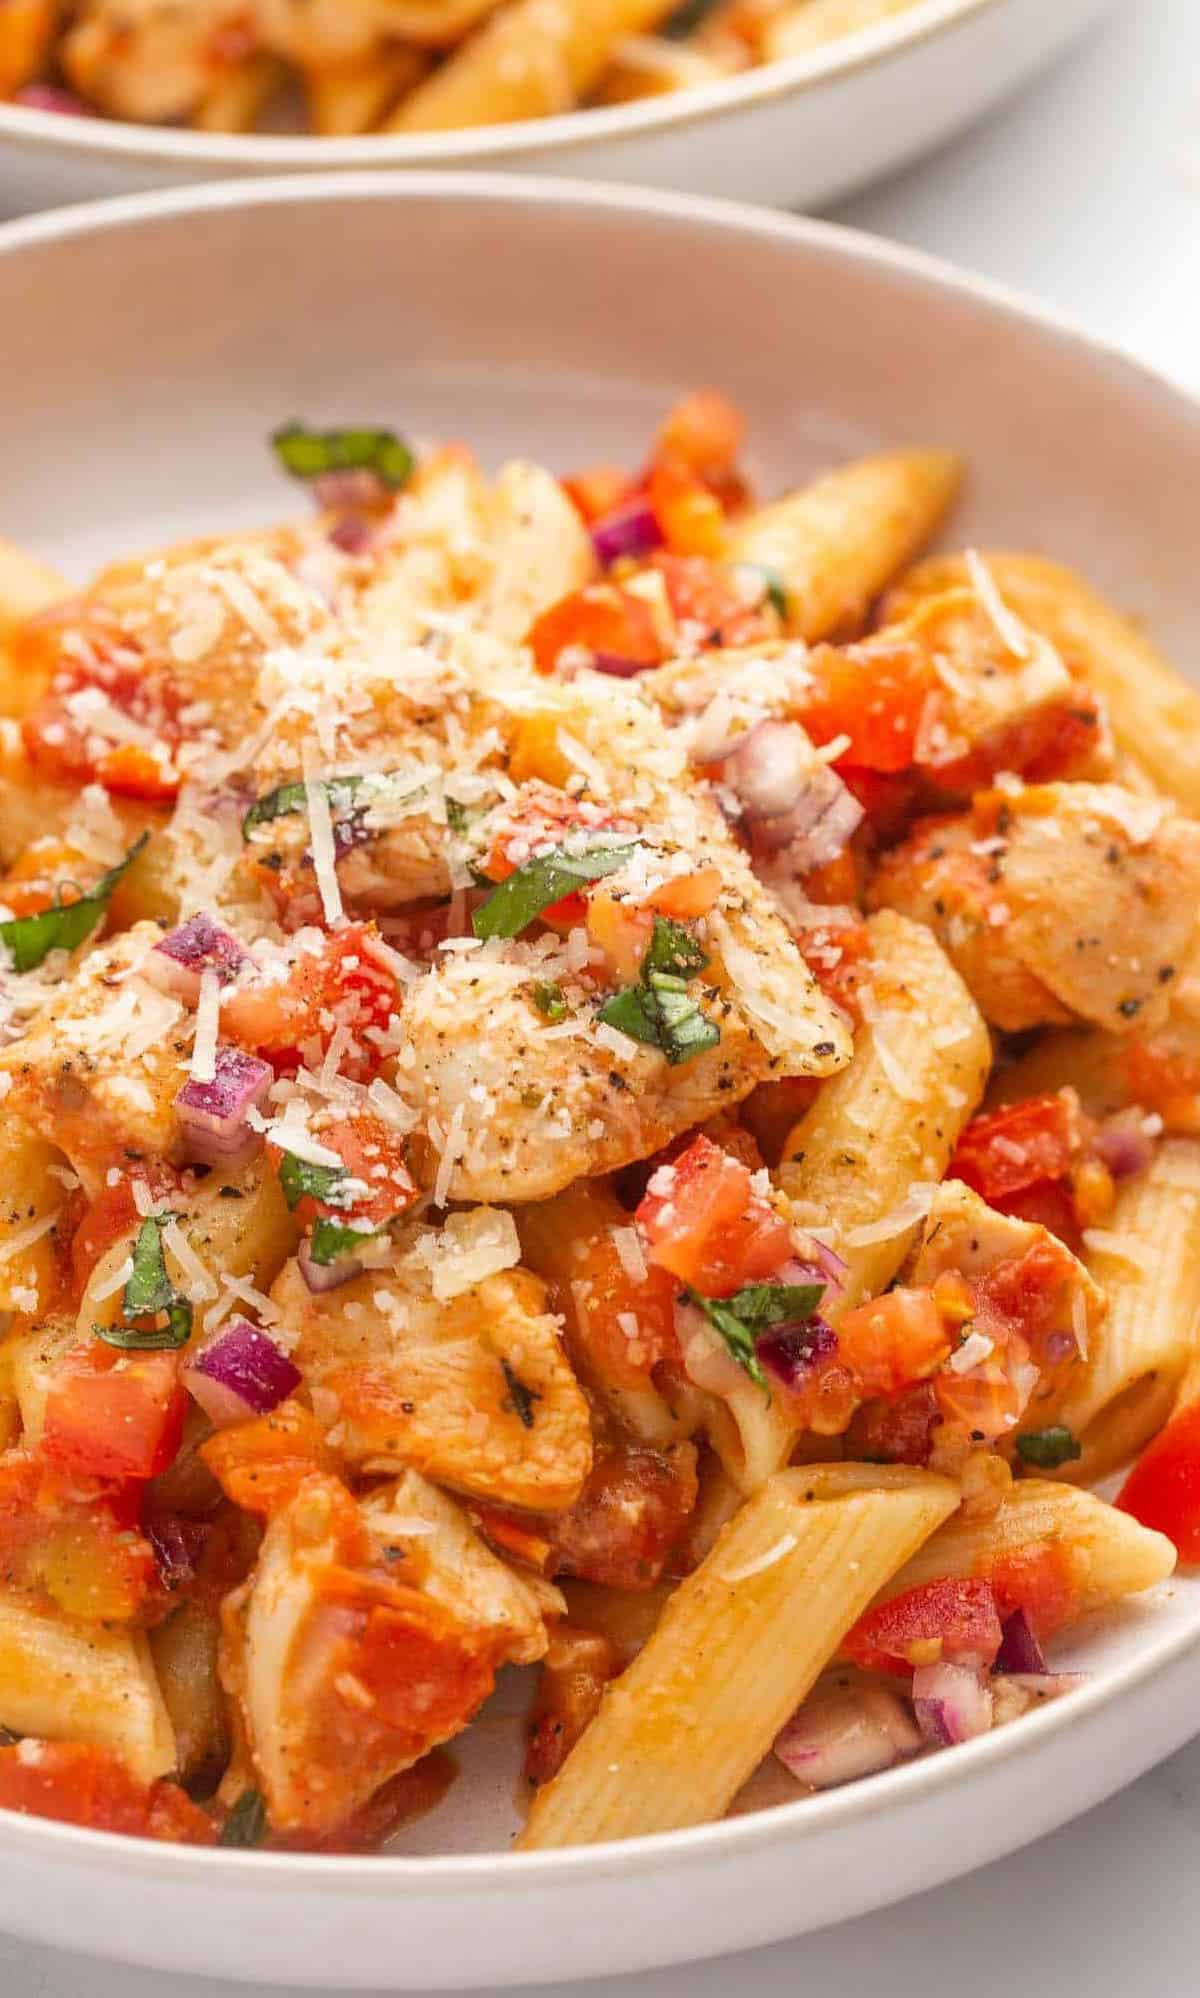  Pasta perfection. One bite in, and you’ll know why.